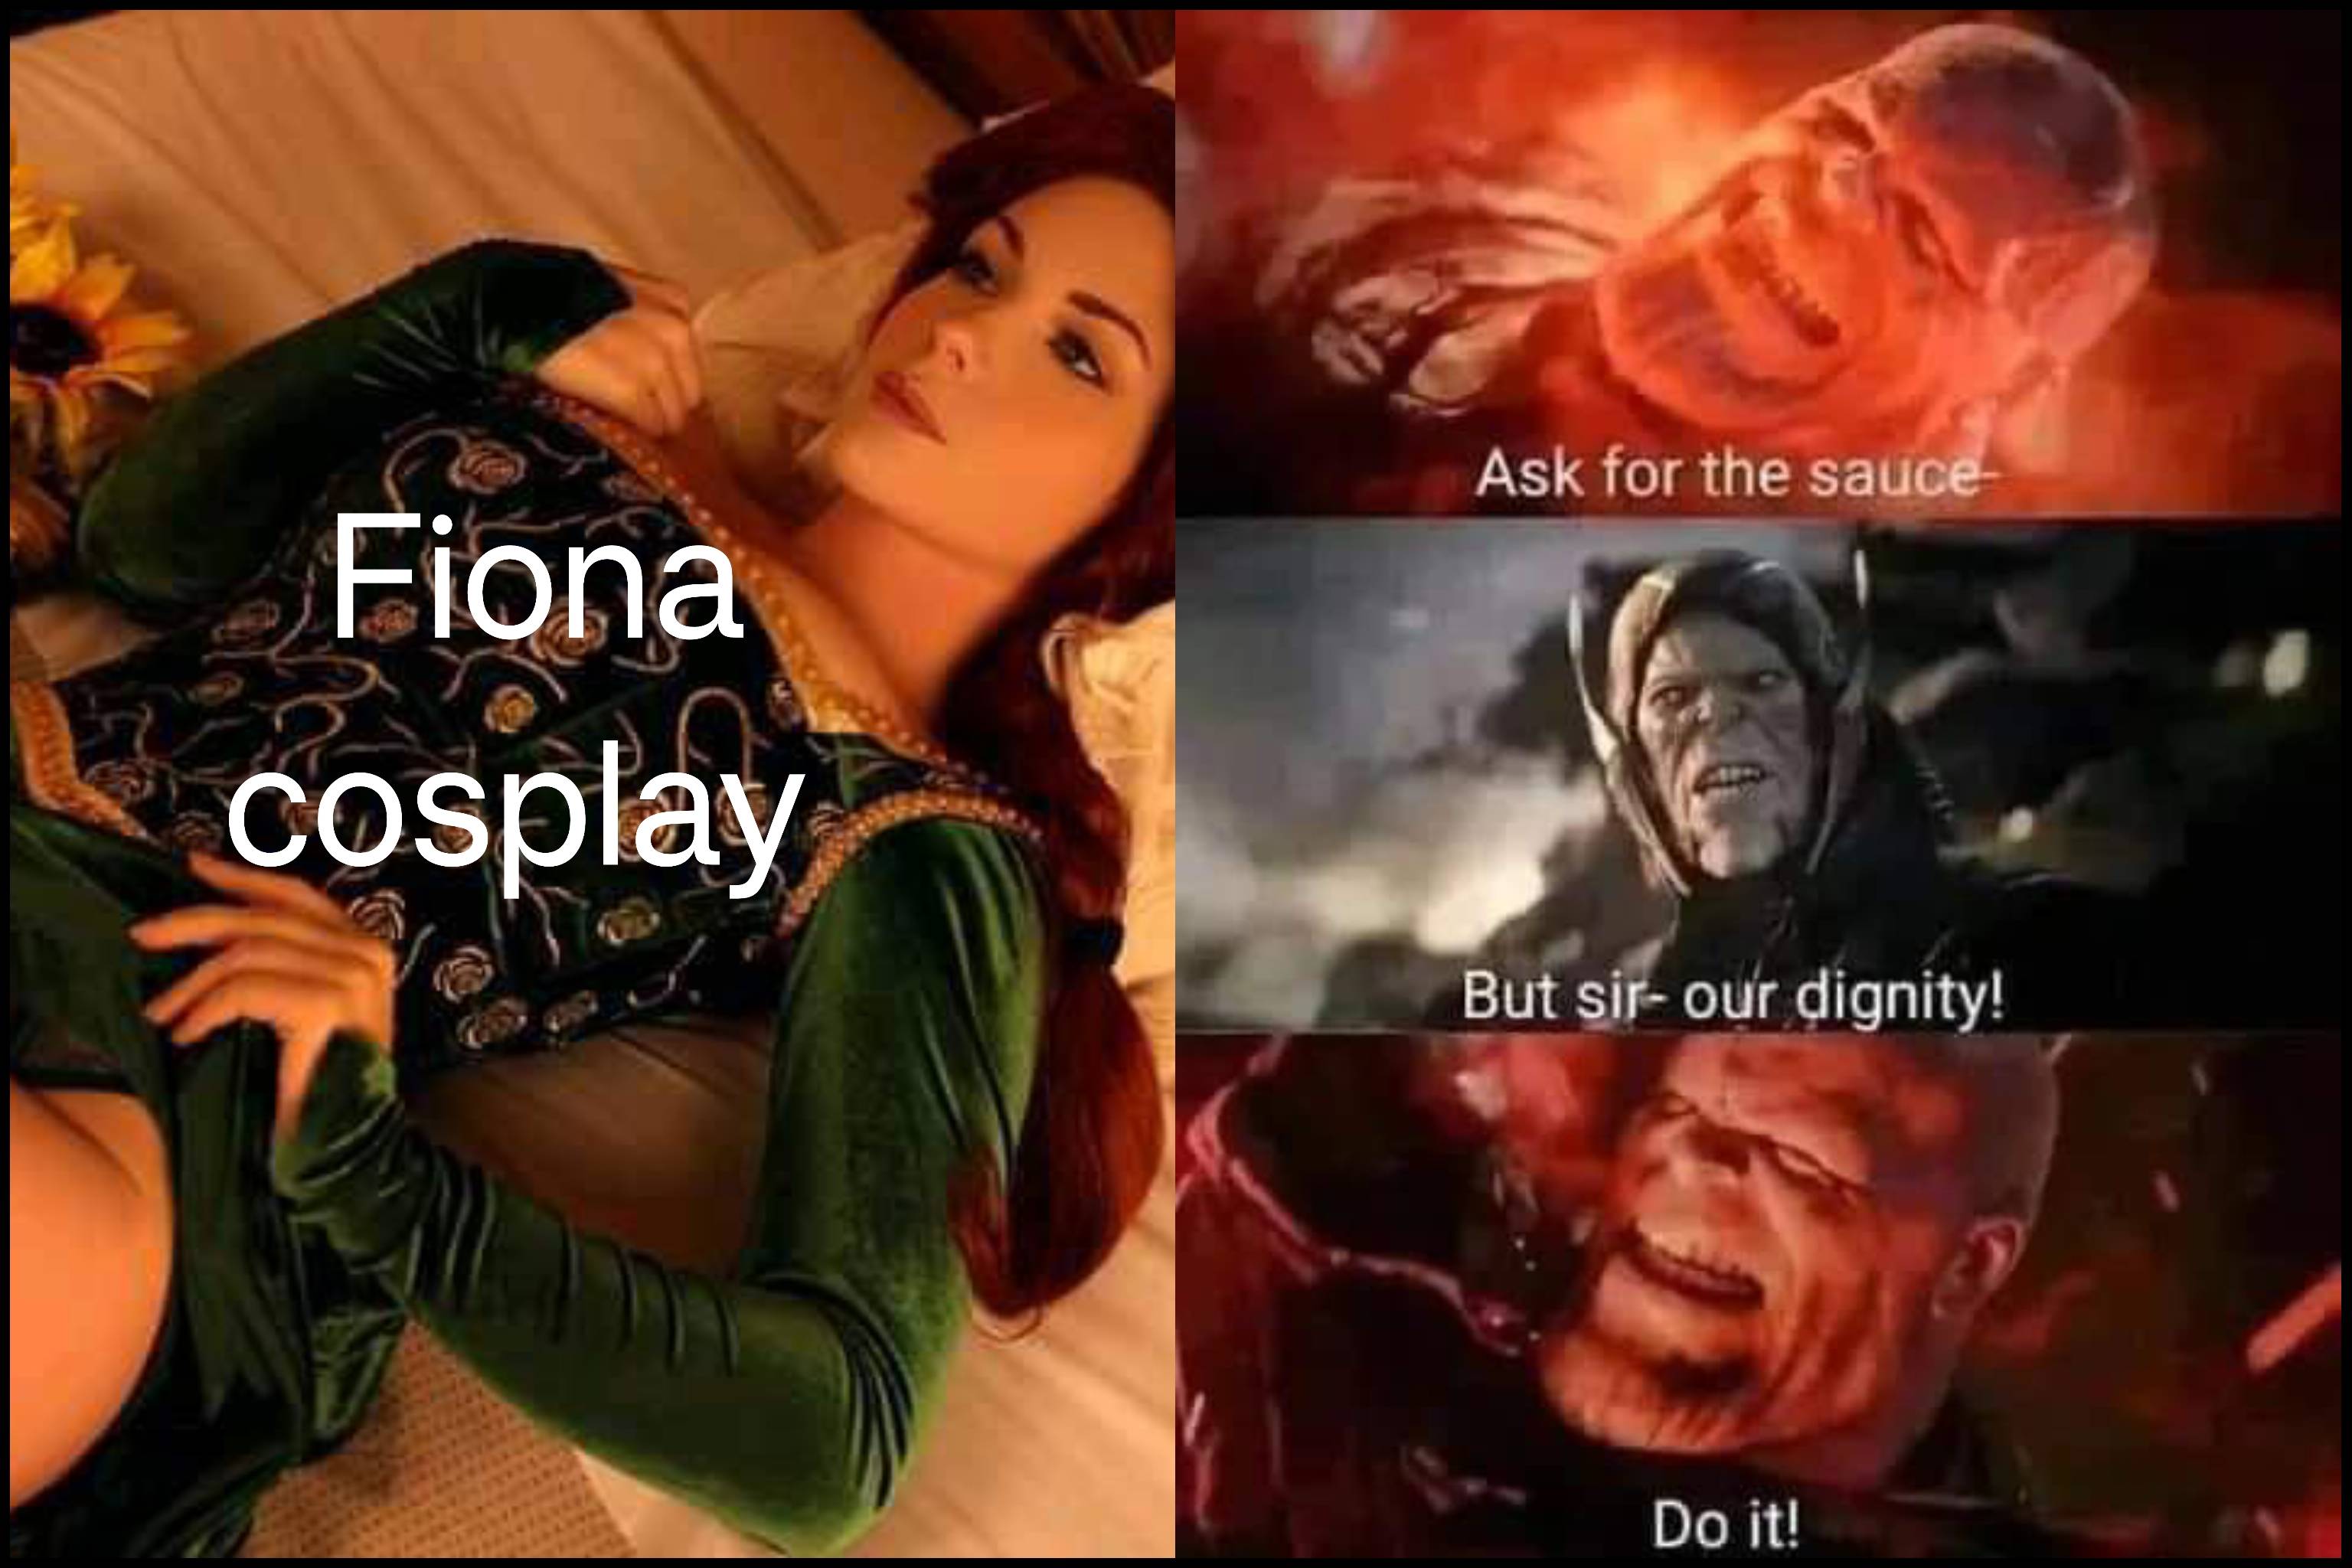 dank memes -  Photograph - Fiona cosplay Ask for the sauce But sir our dignity! Do it!